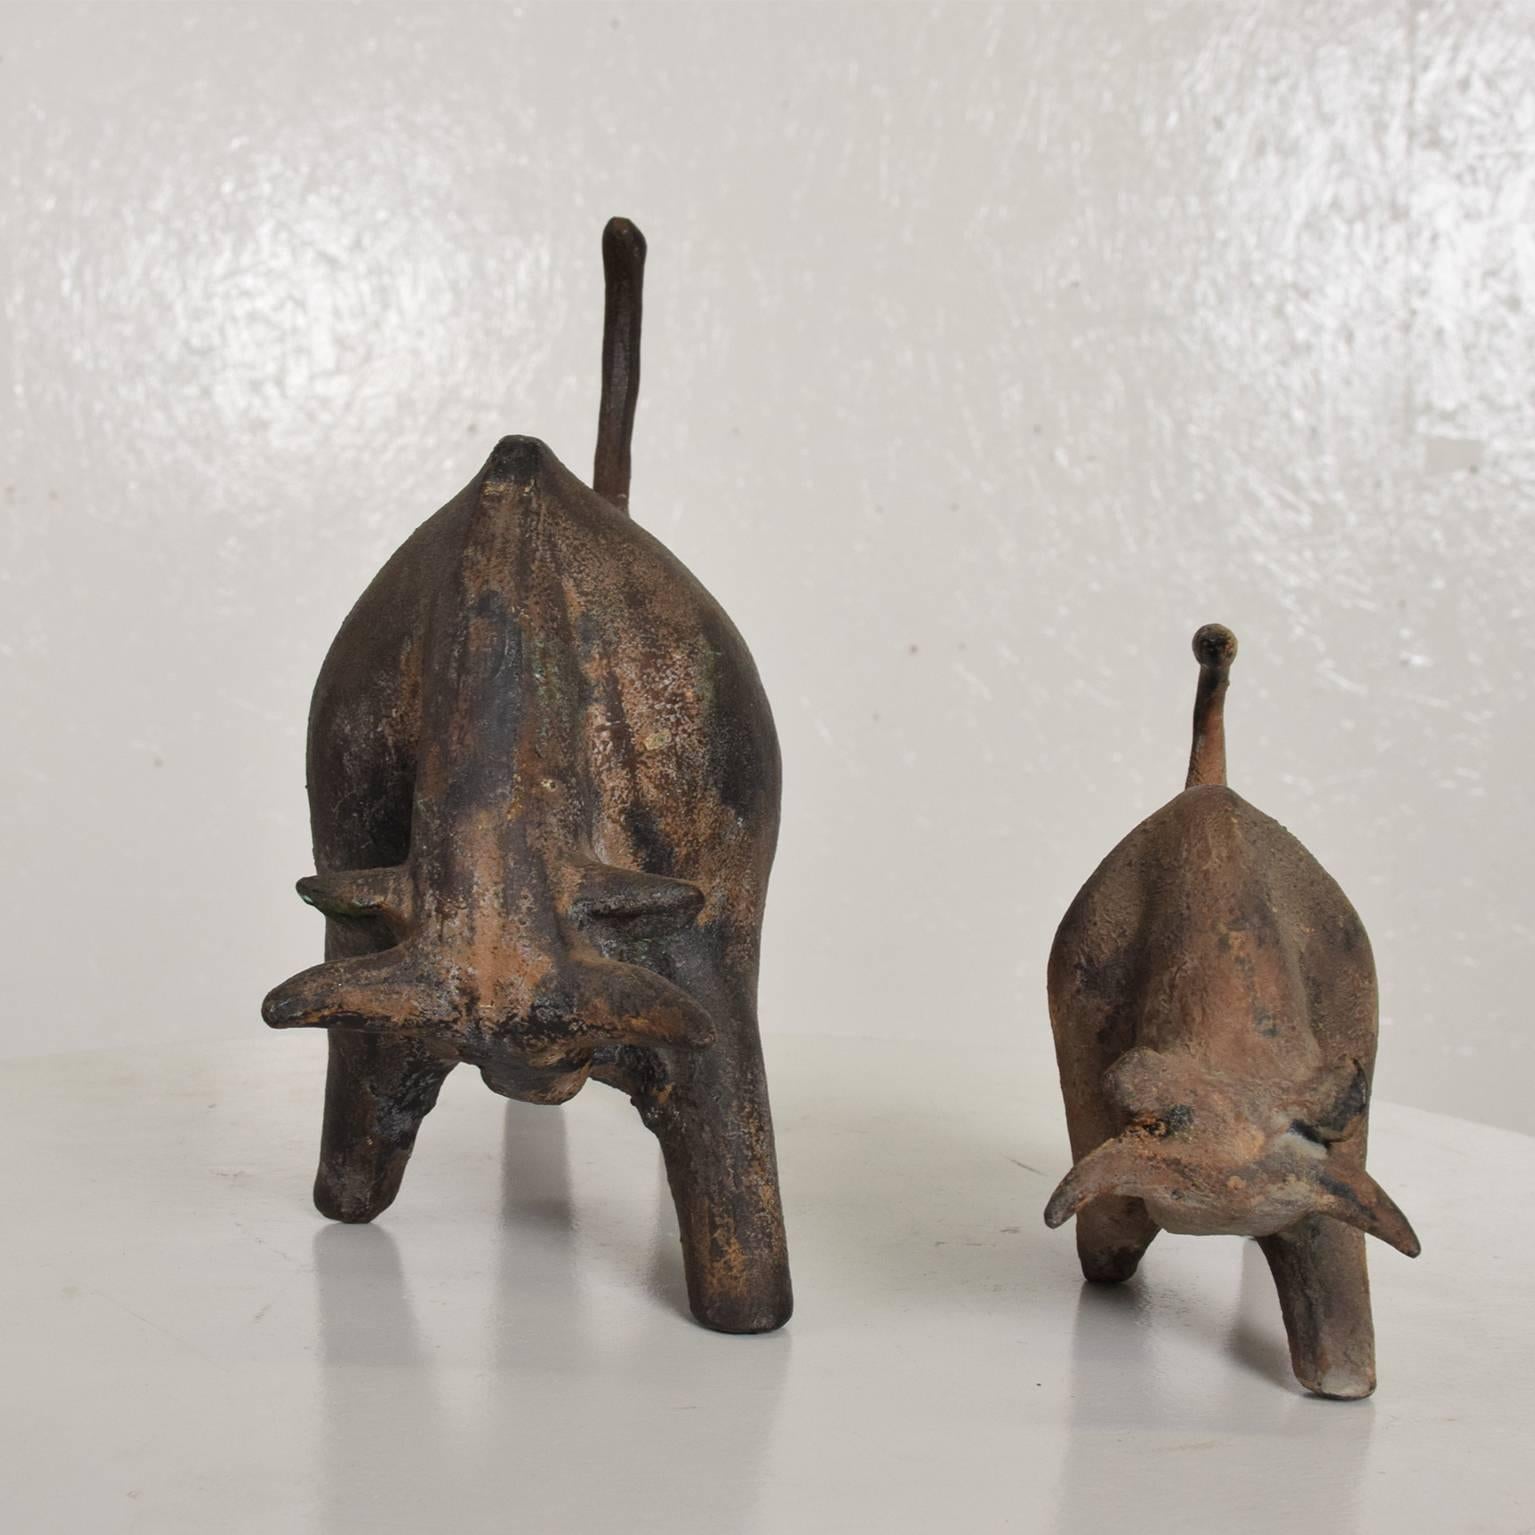 For your consideration a pair of iron bull sculptures. Made in Japan, circa 1960s.
Dimensions:
Large 8 3/8